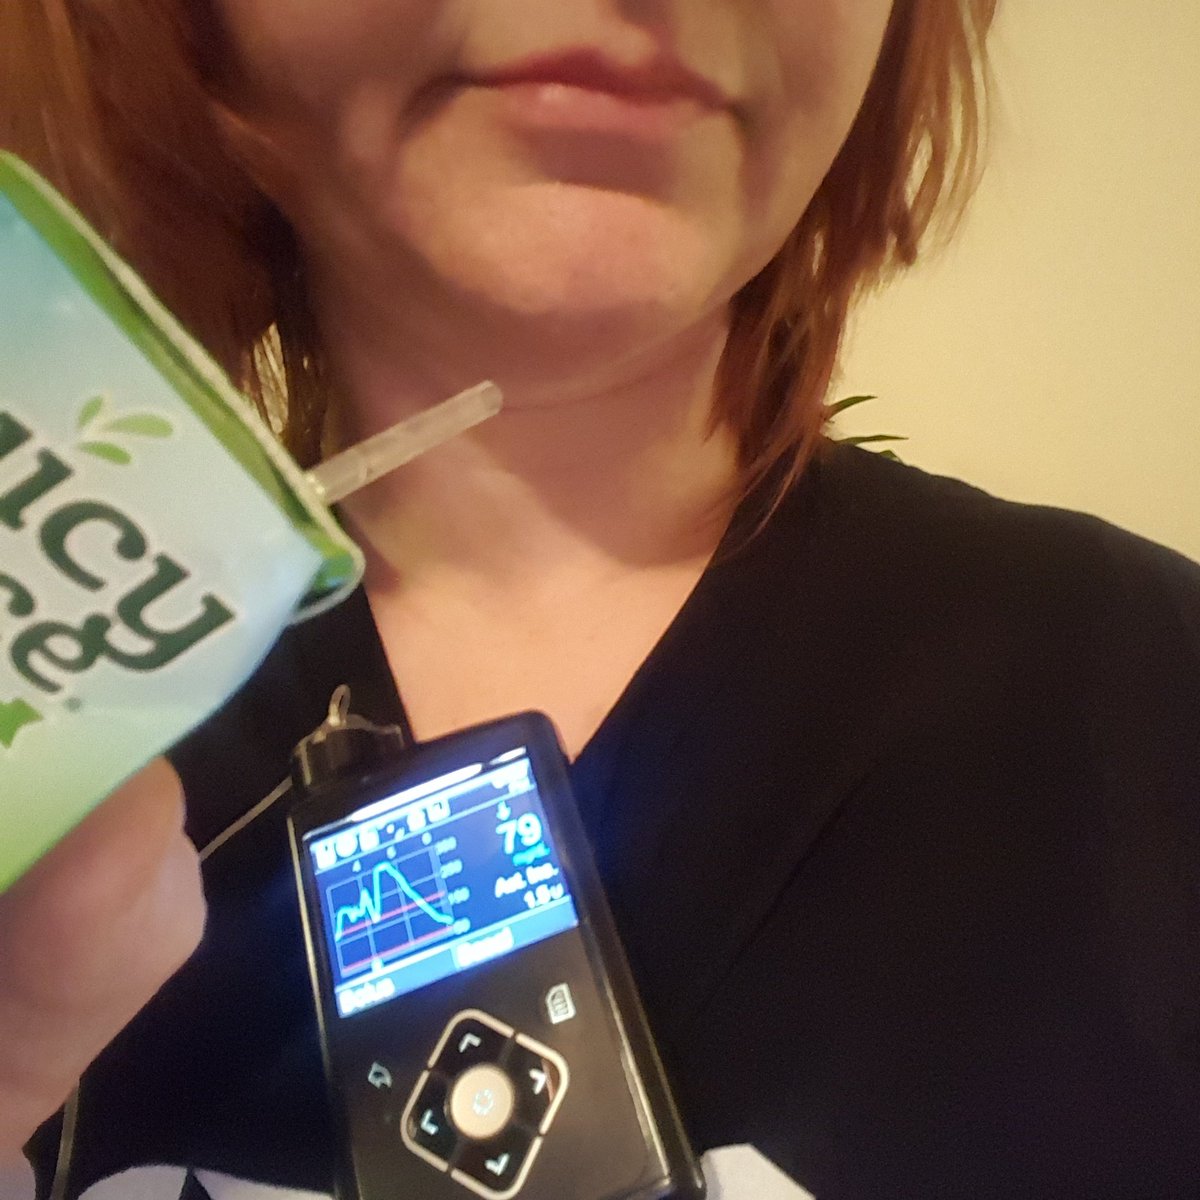 When you have to delay your workout so a juice box can save your life! #juicyjuice #juiceboxmafia #t1dproblems #cgm #cgms #Medtronic #t1dwontstopme #t1dyoudontsee #T1DLooksLikeMe